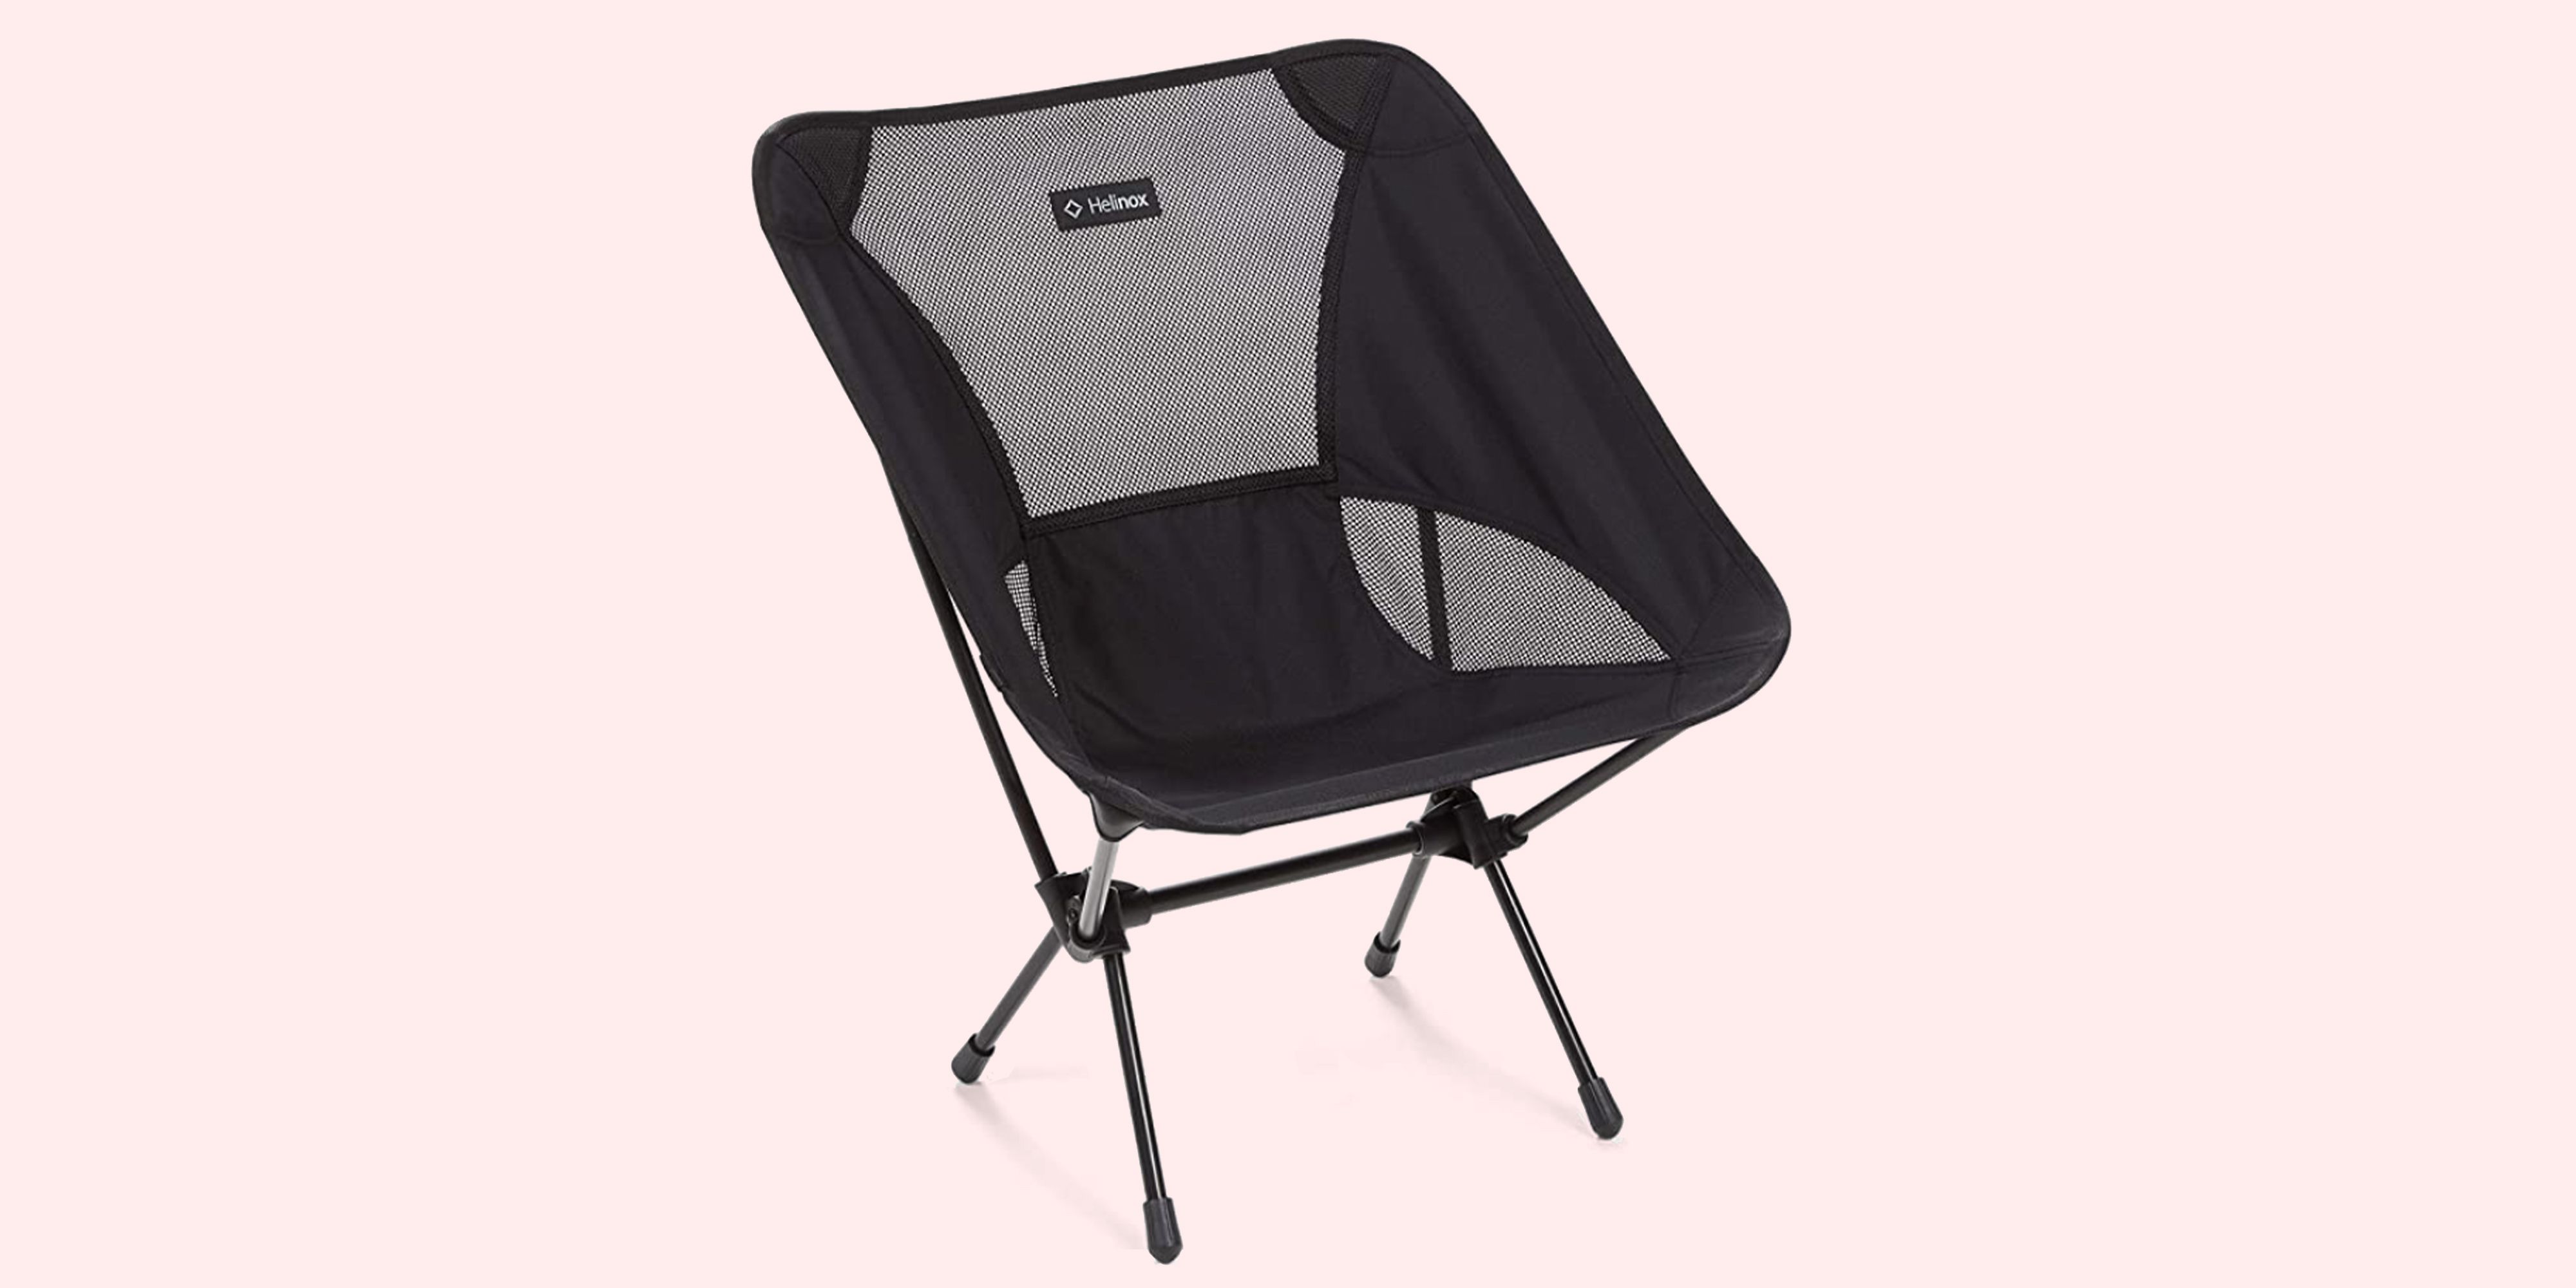 RORAIMA Sinature Lightweight Outdoor Camping Chair Ergonomic Design with Comfy and Deep Seat Products Size 22x21.7x28.3 Color Gray 